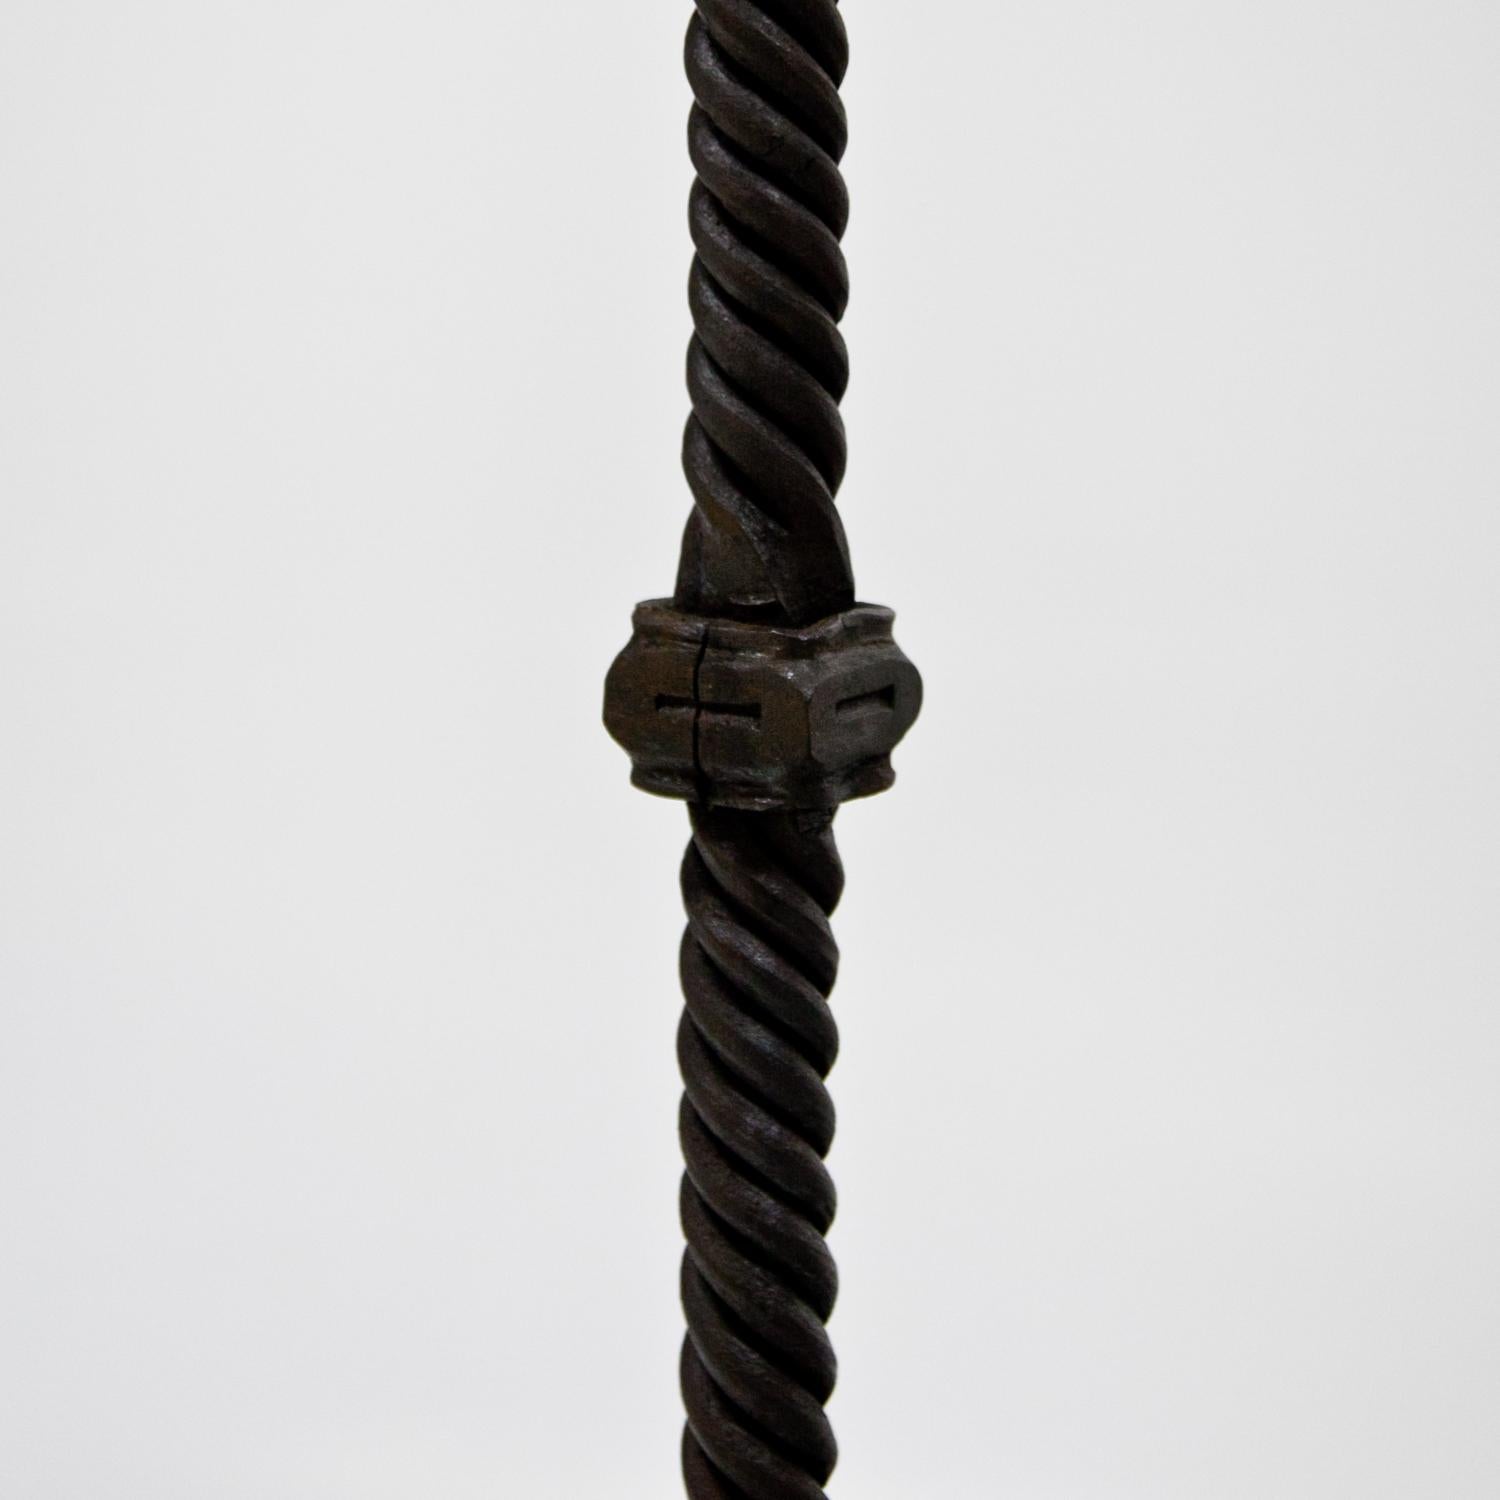 Wrought Iron Candlestick Attributed to Alessandro Mazzucotelli, Italy (Italienisch)